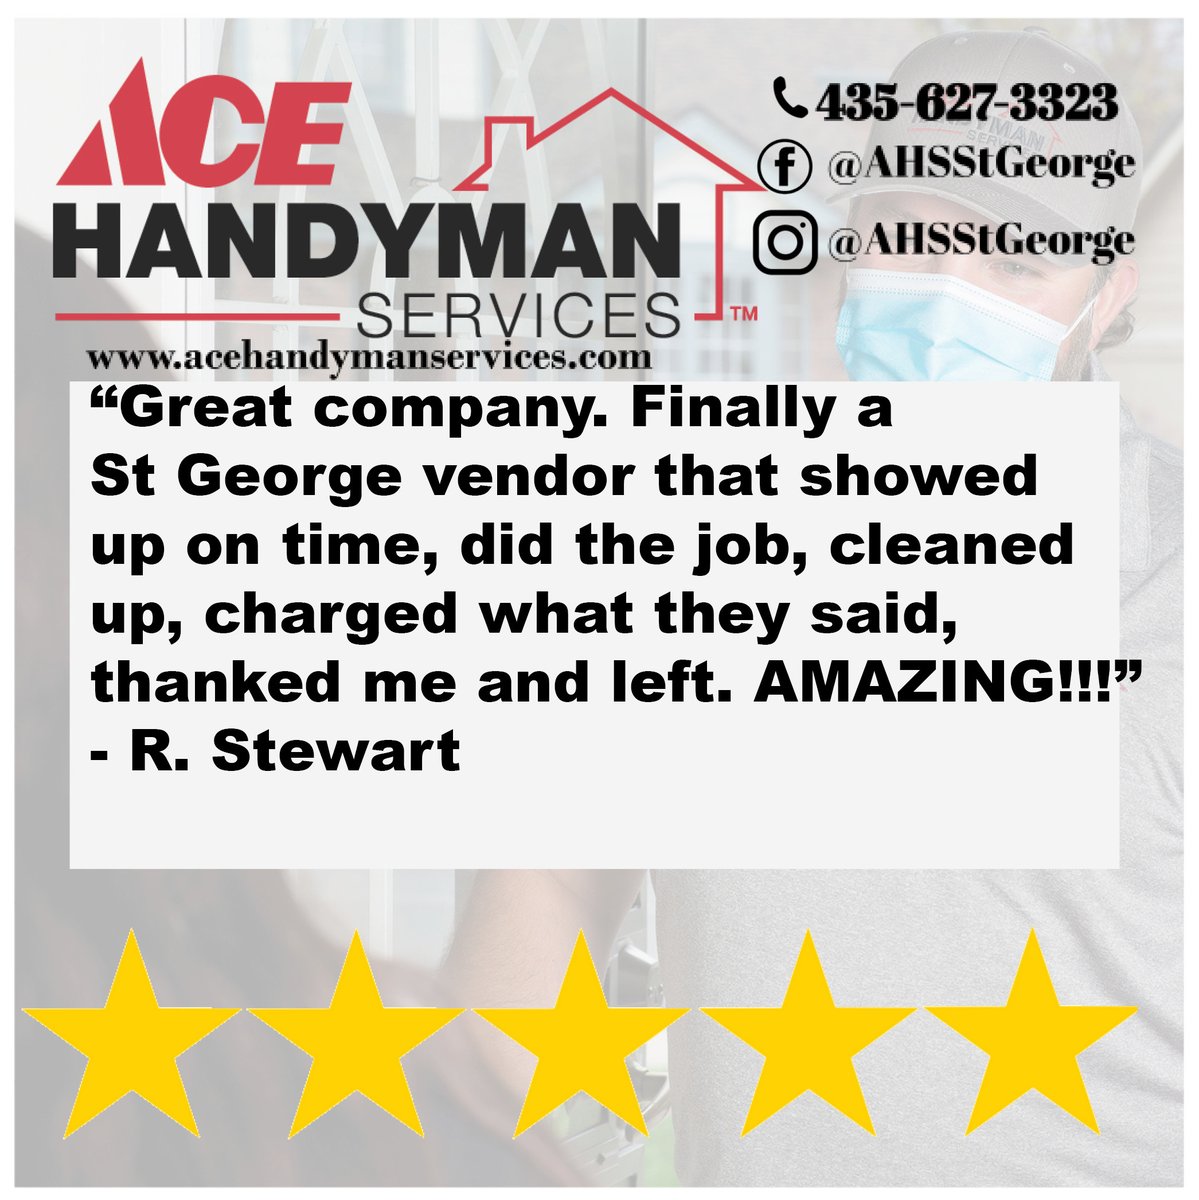 Another Terrific Tuesday review!